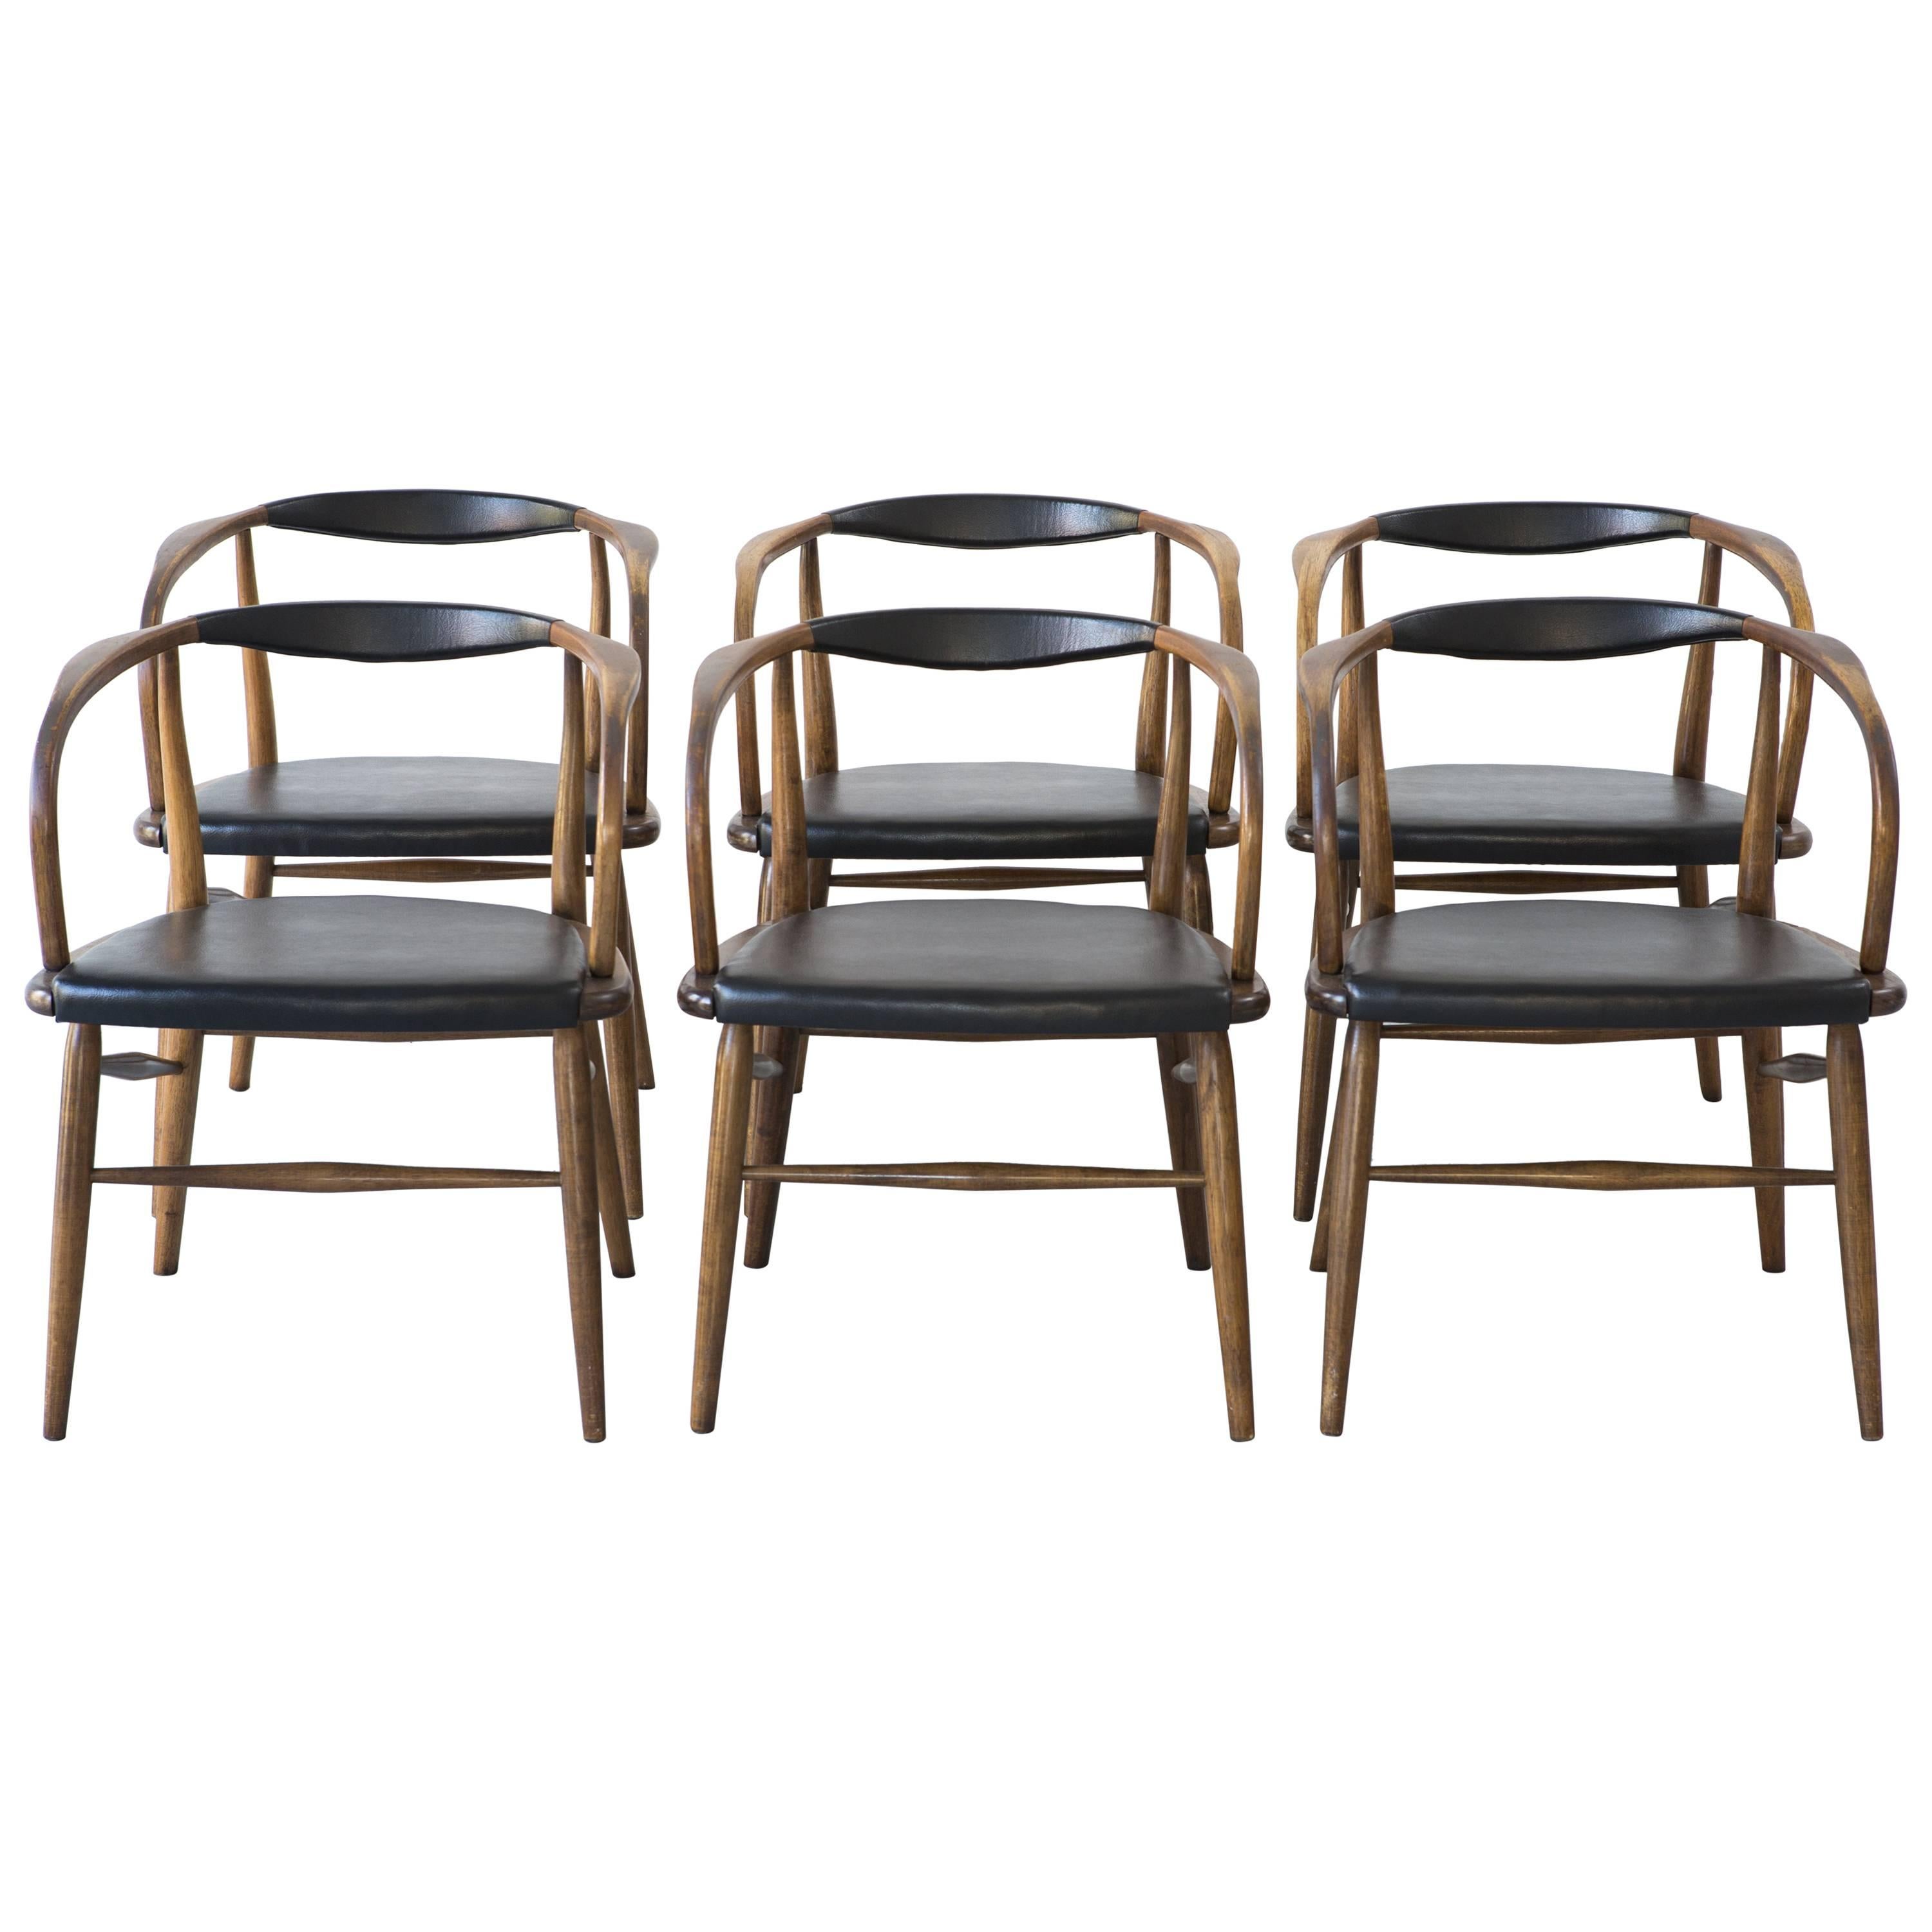 Set of Six Mid-Century Modern Lawrence Peabody Bentwood Dining Chairs